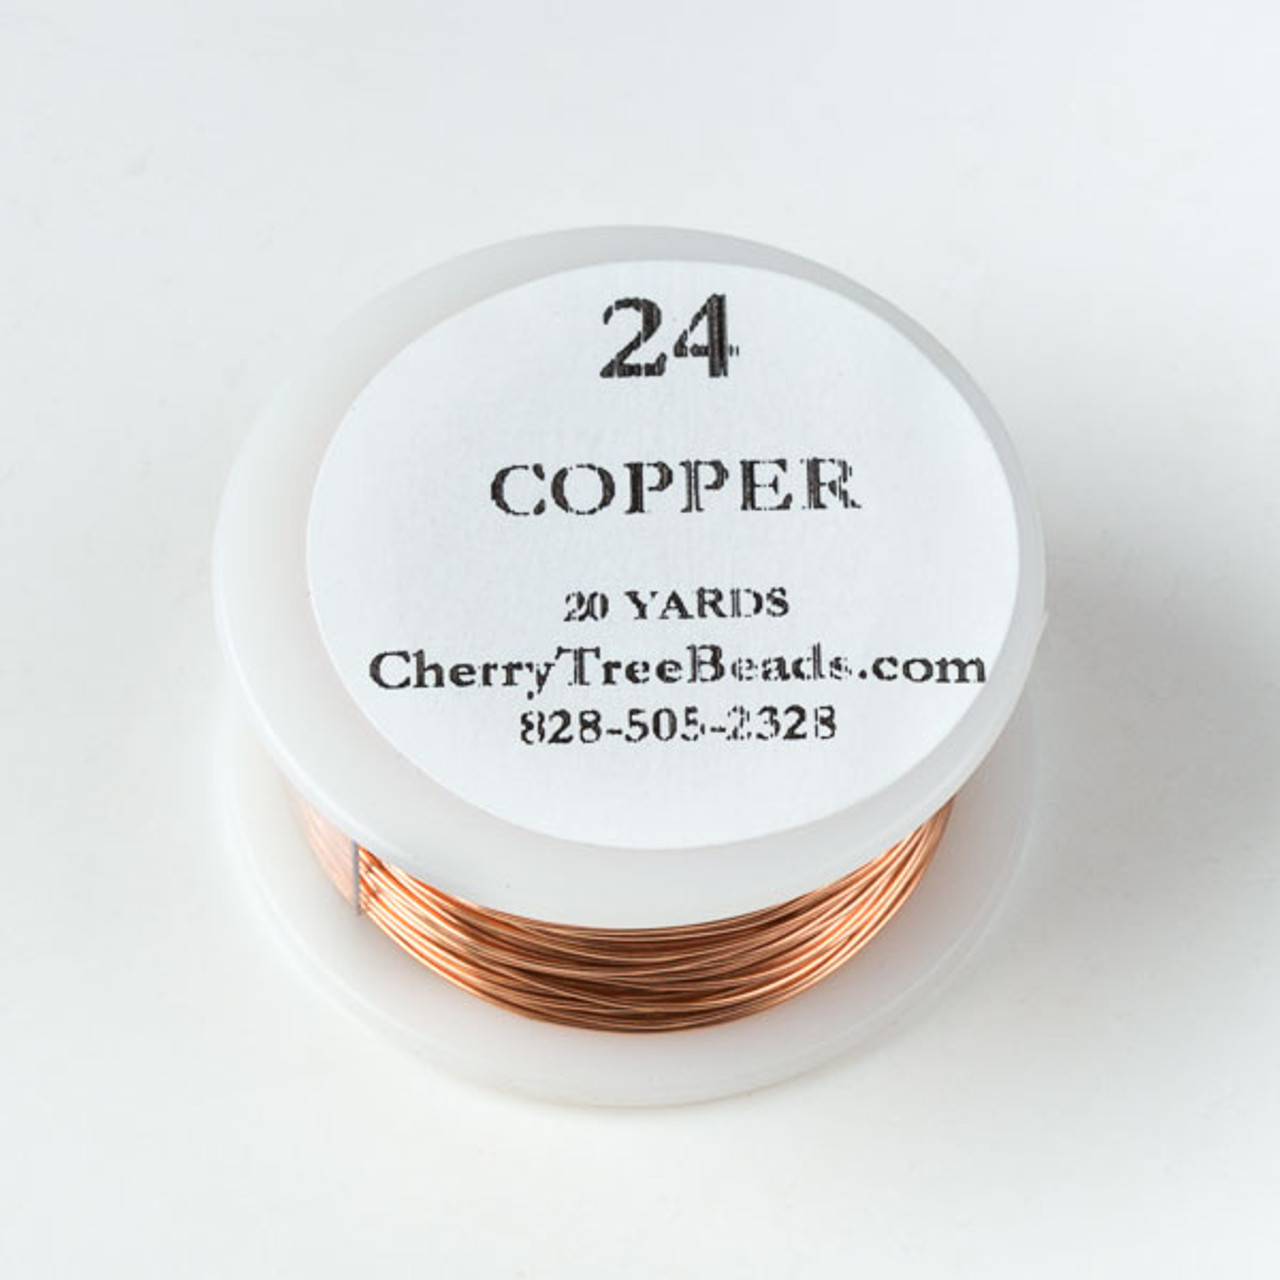 24 Gauge Coated Tarnish Resistant Antique Copper Wire on a 20 Yard Spool